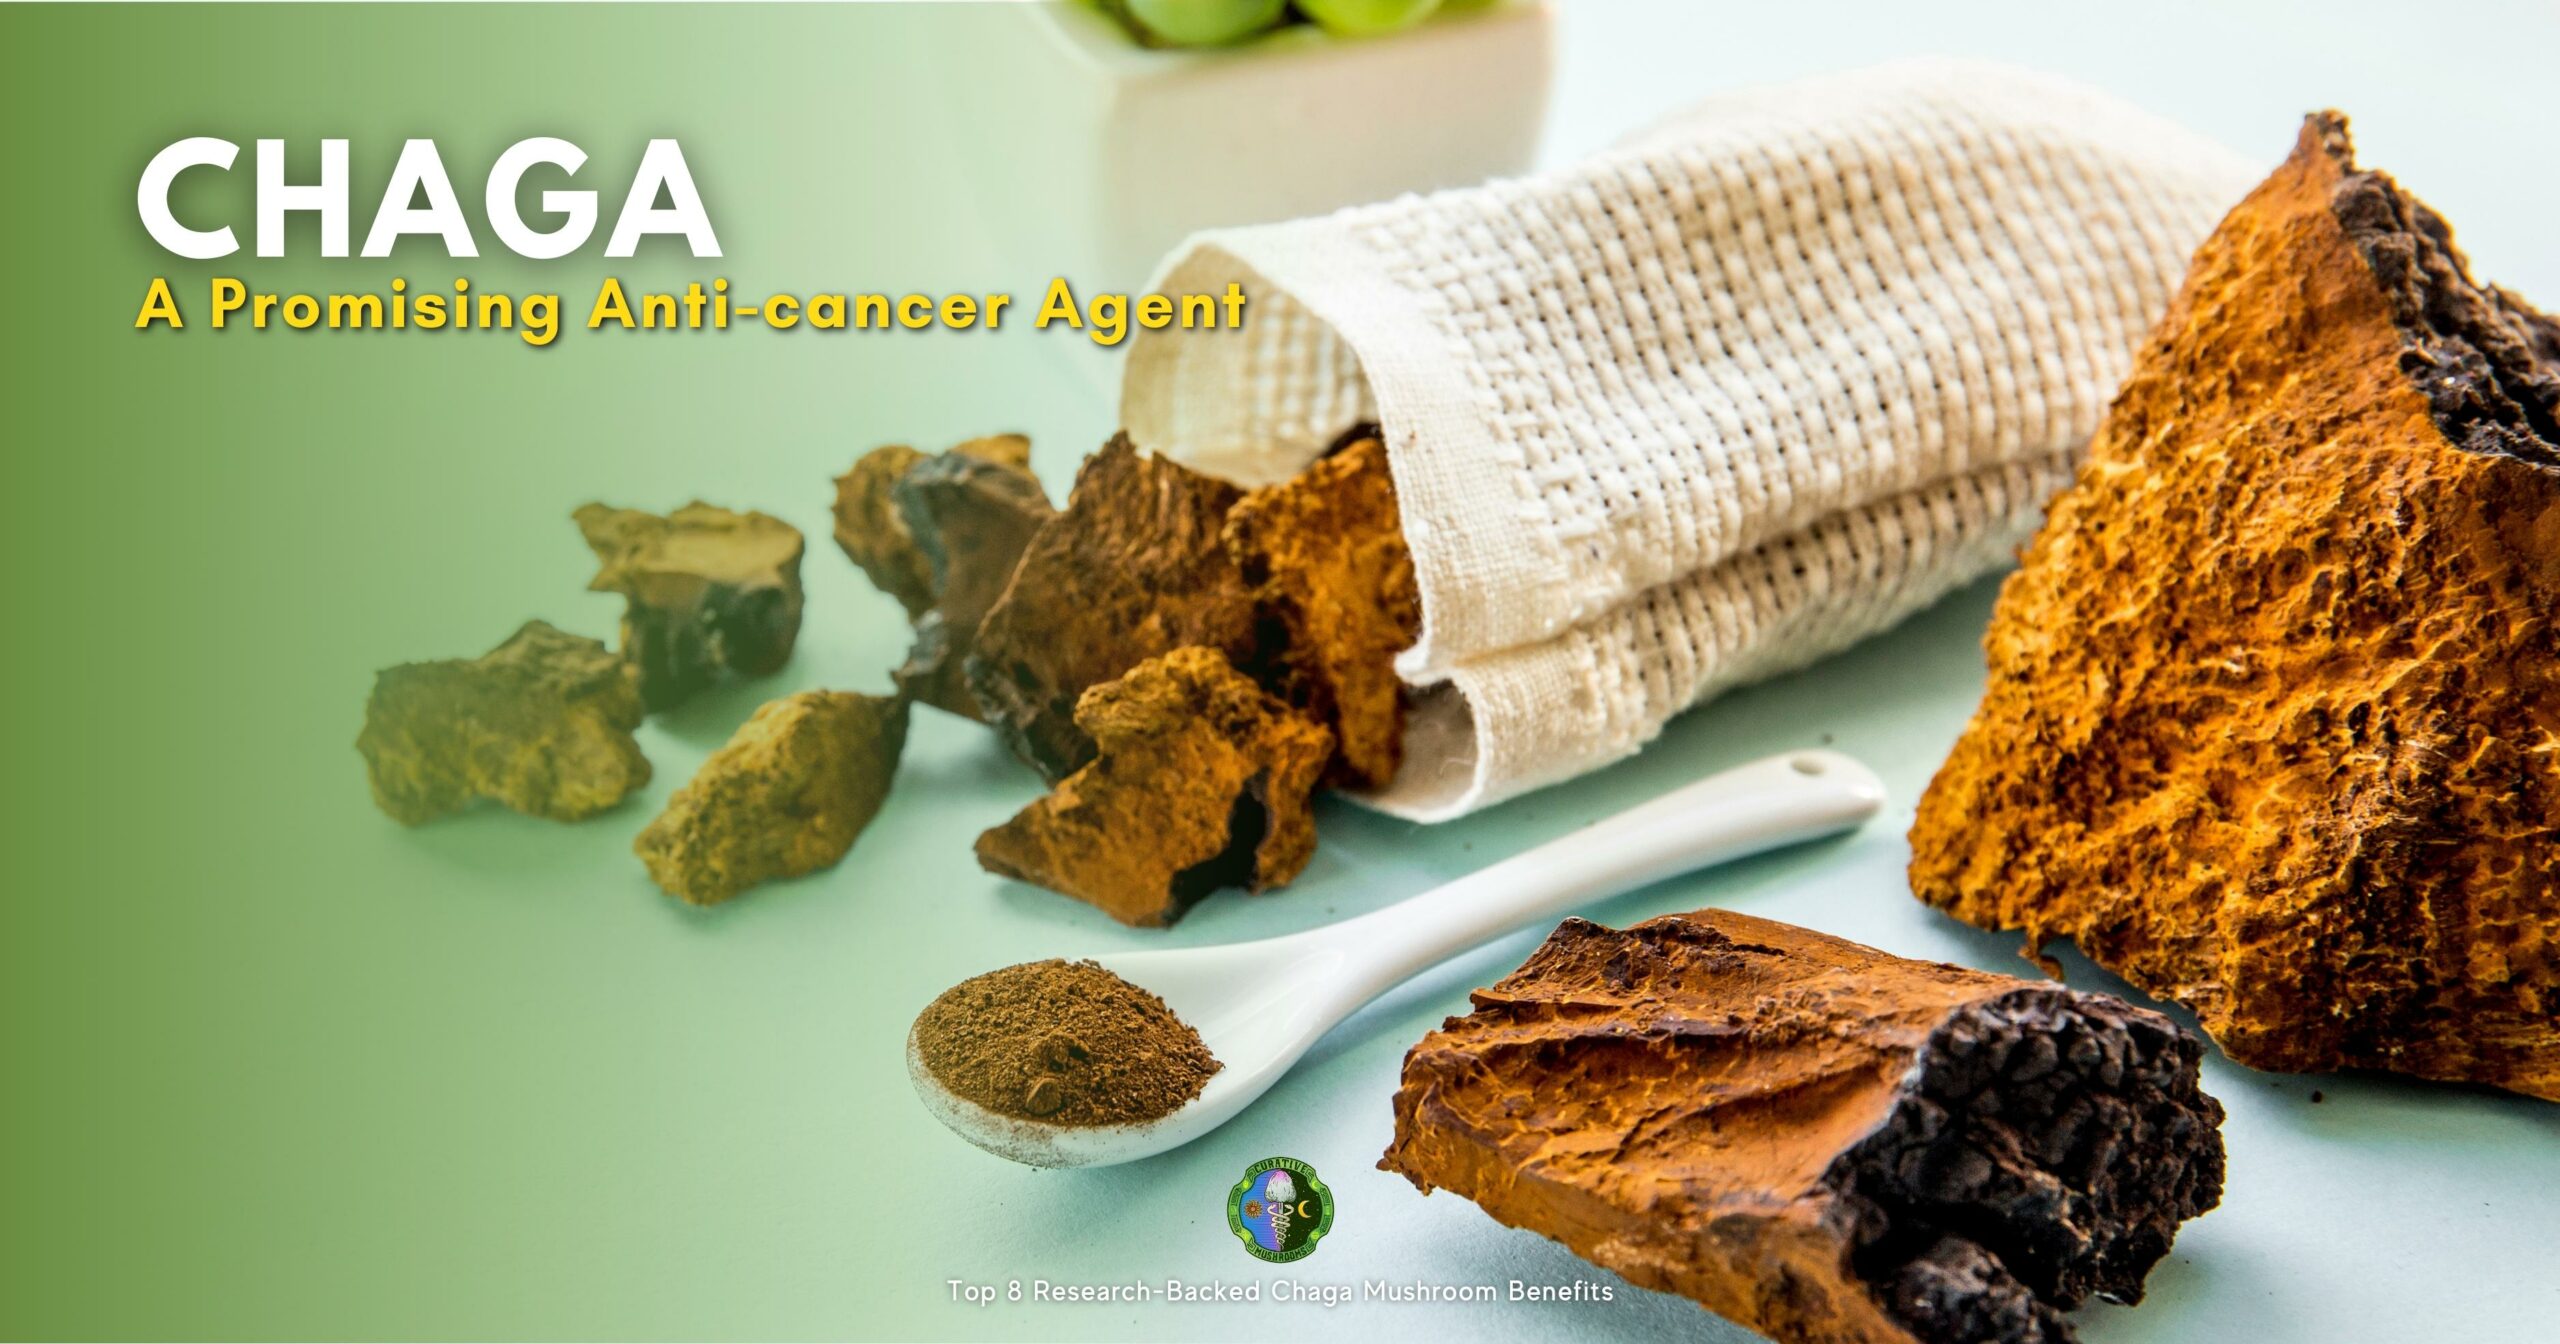 Top 8 Research-Backed Chaga Mushroom Benefits - Potential anti-cancer properties - extract significantly reduce tumor growth and improve survival rate